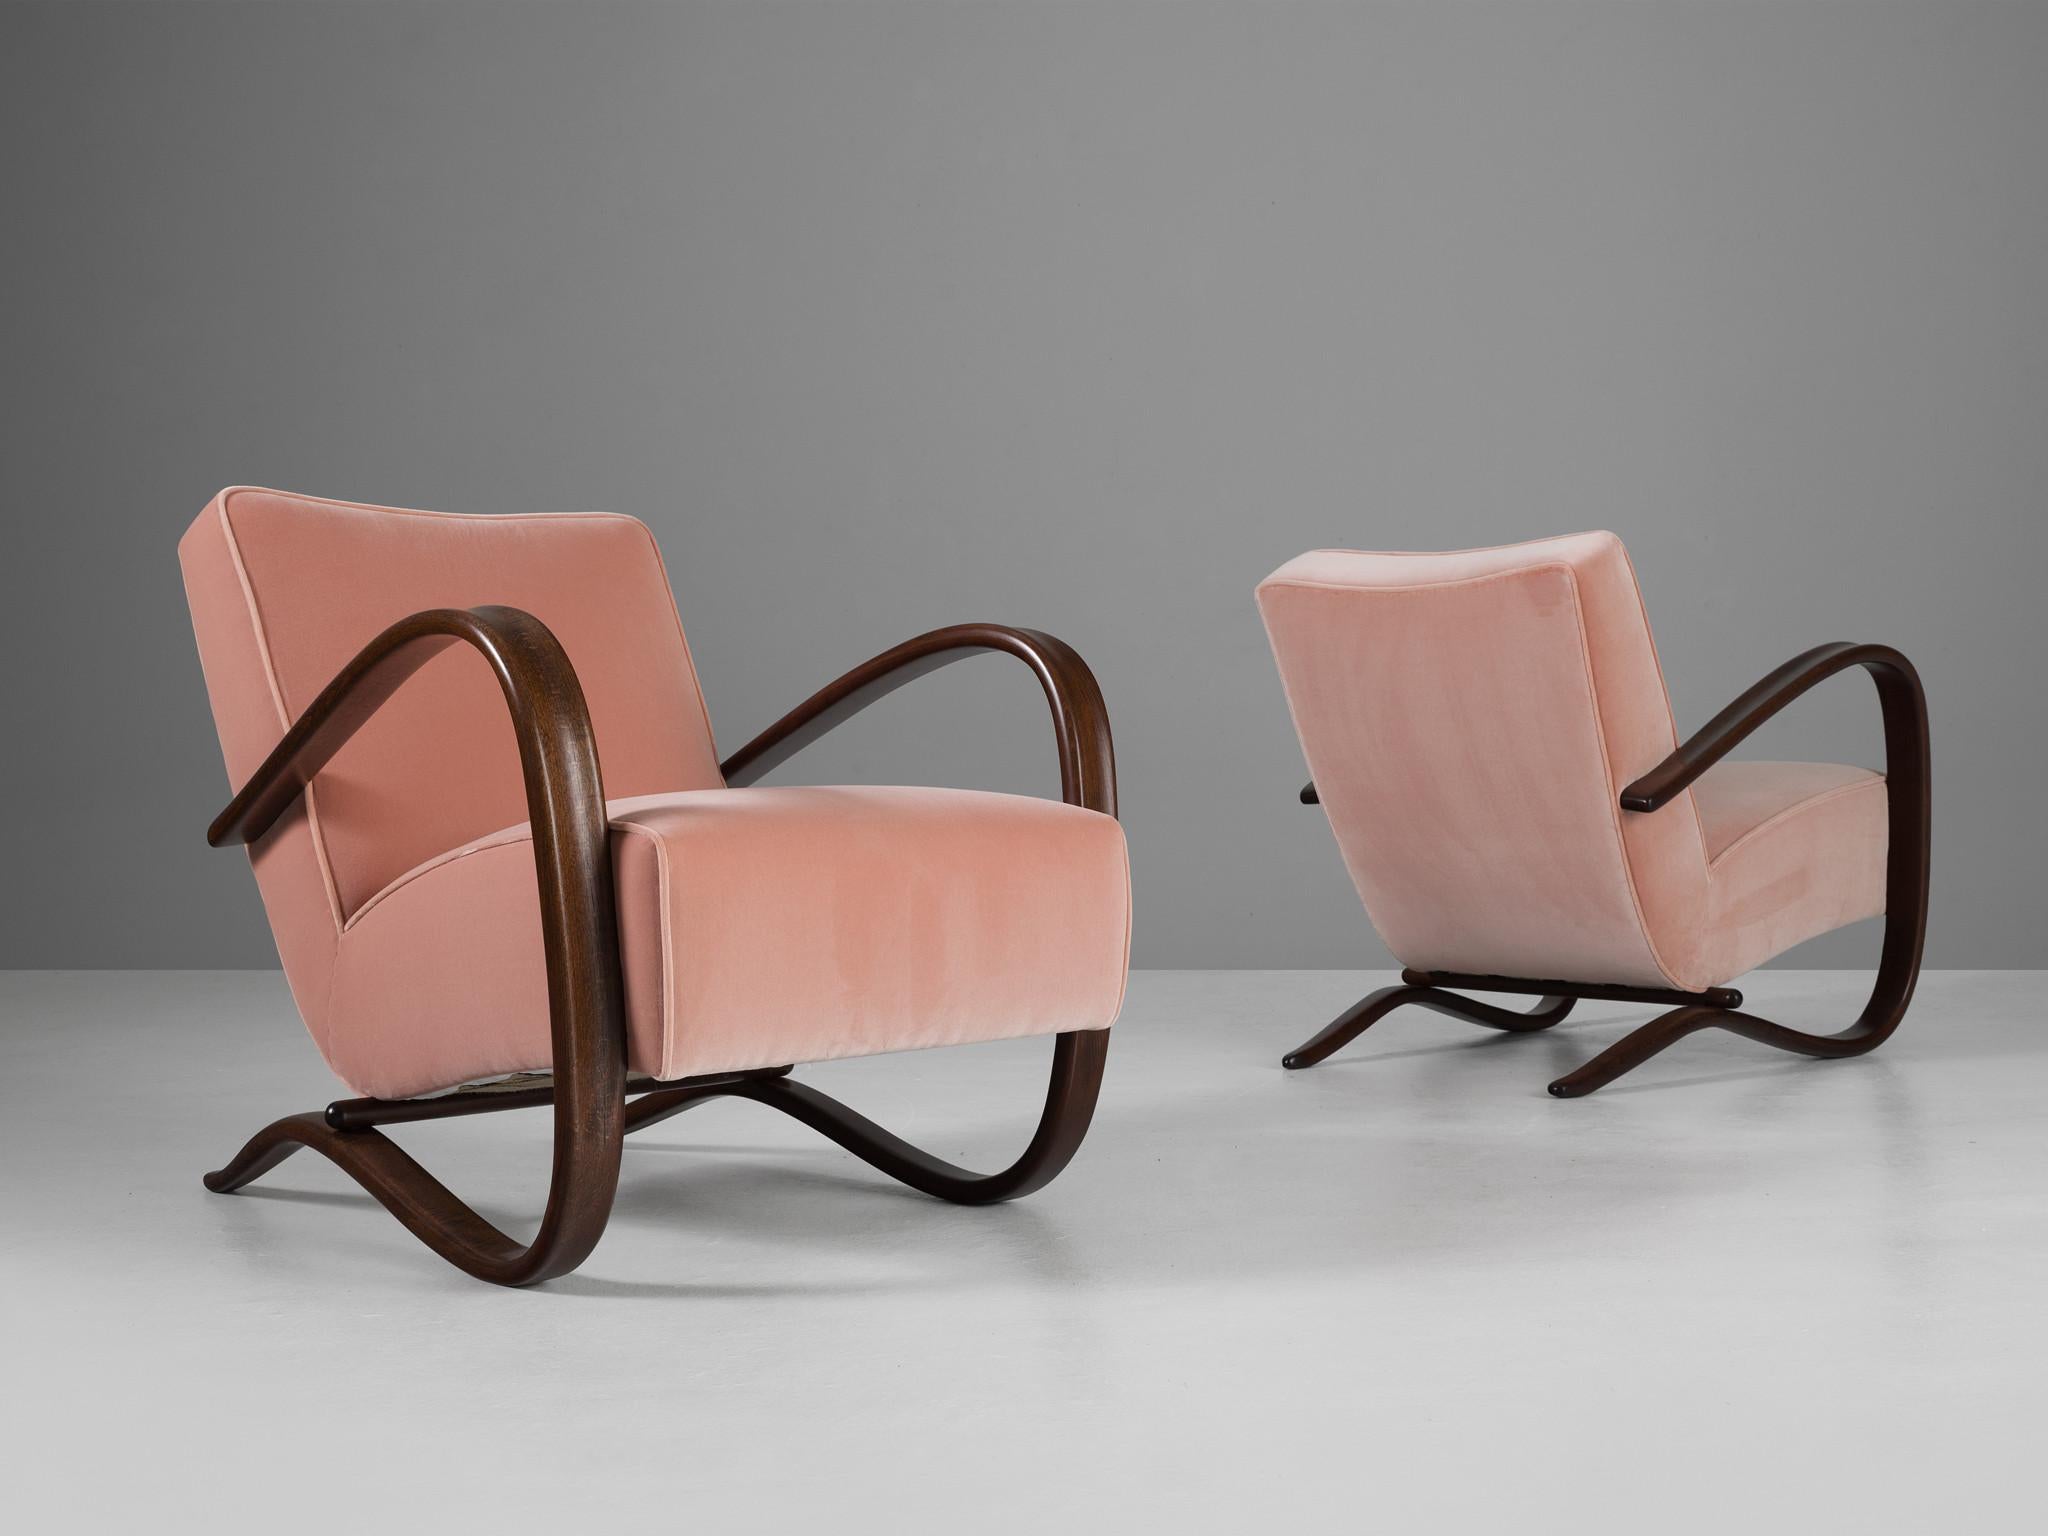 Jindrich Halabala, lounge chairs, model 'H269', stained beech, velvet, Czech Republic, 1930s.

Extraordinary easy chairs upholstered in a fine powdery pink velvet. These armchairs have a very dynamic and abundant appearance and the pink colored